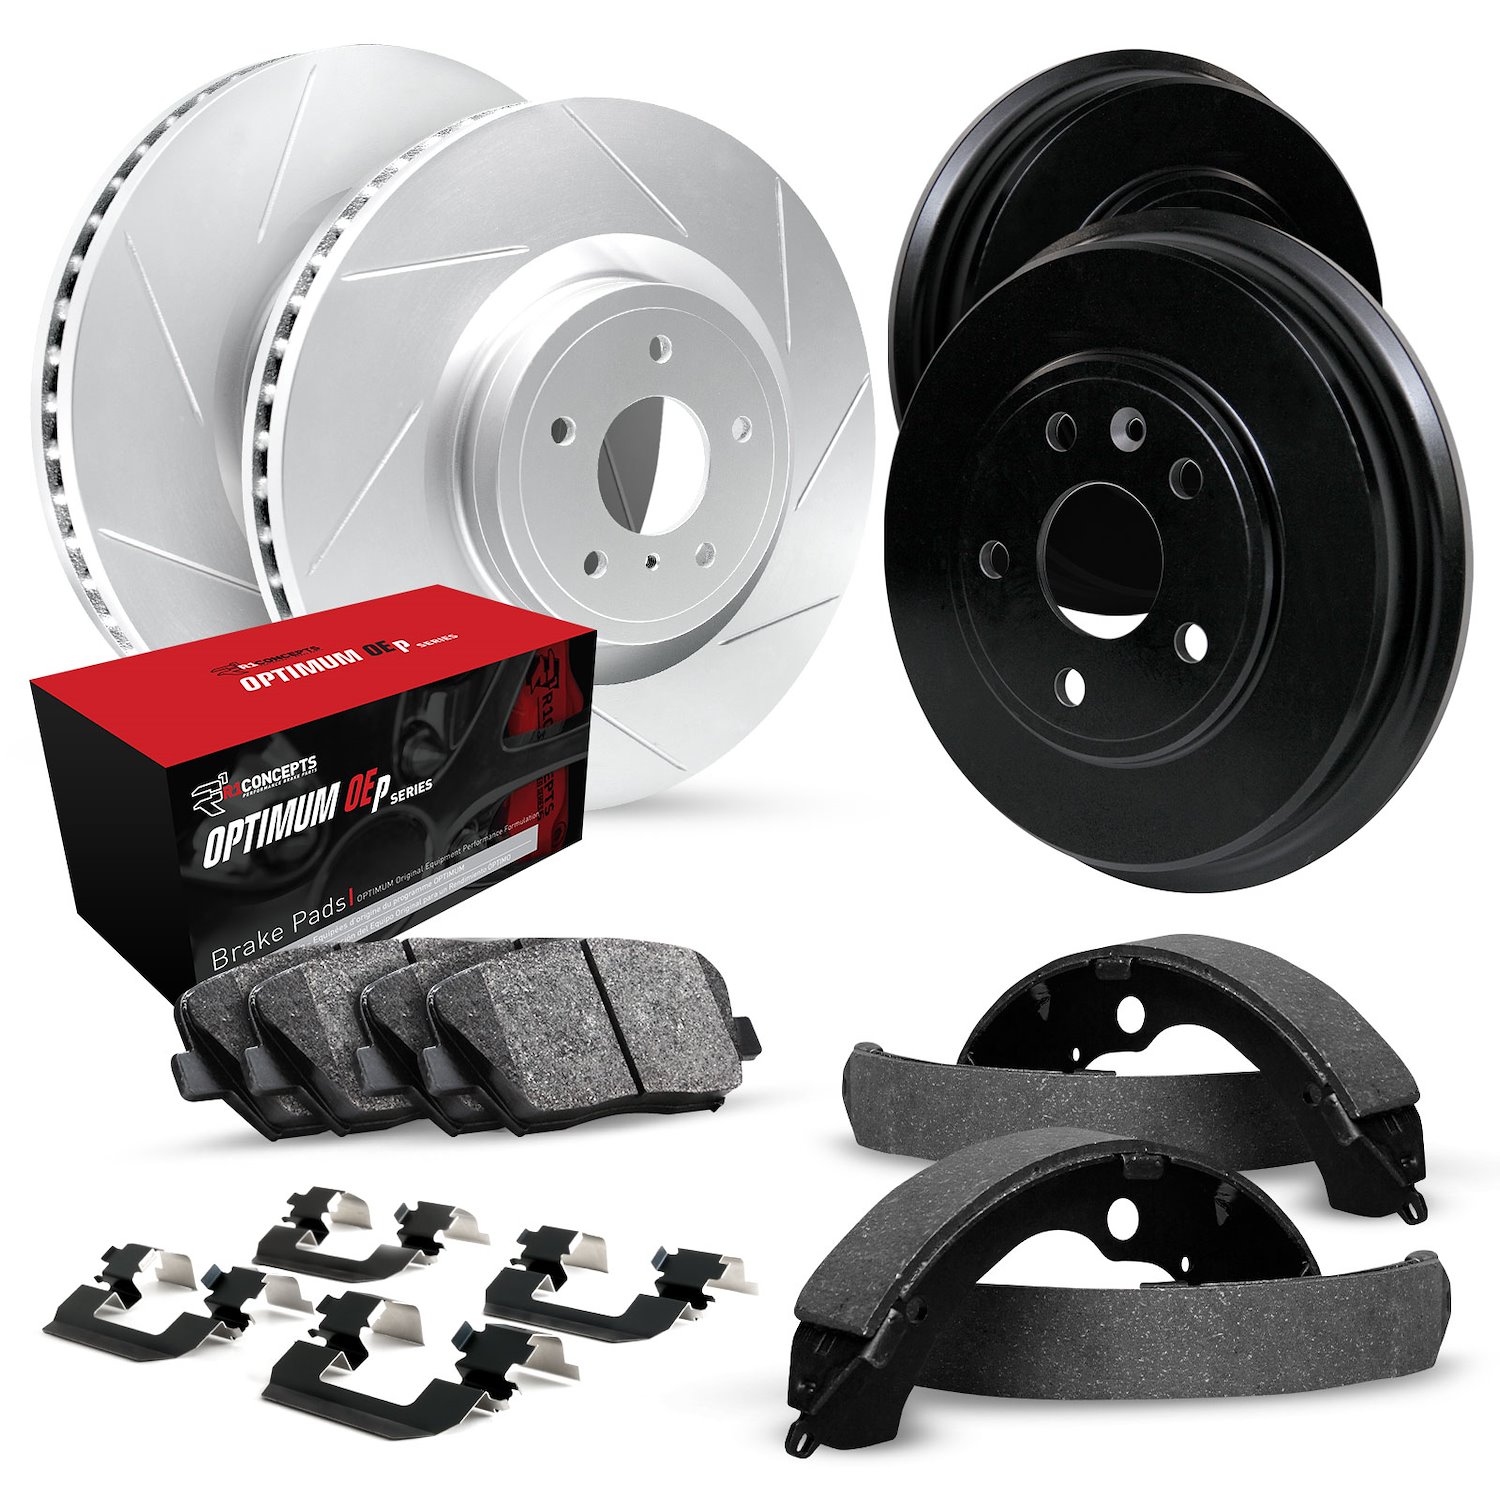 GEO-Carbon Slotted Brake Rotor & Drum Set w/Optimum OE Pads, Shoes, & Hardware, 1985-1986 GM, Position: Front & Rear